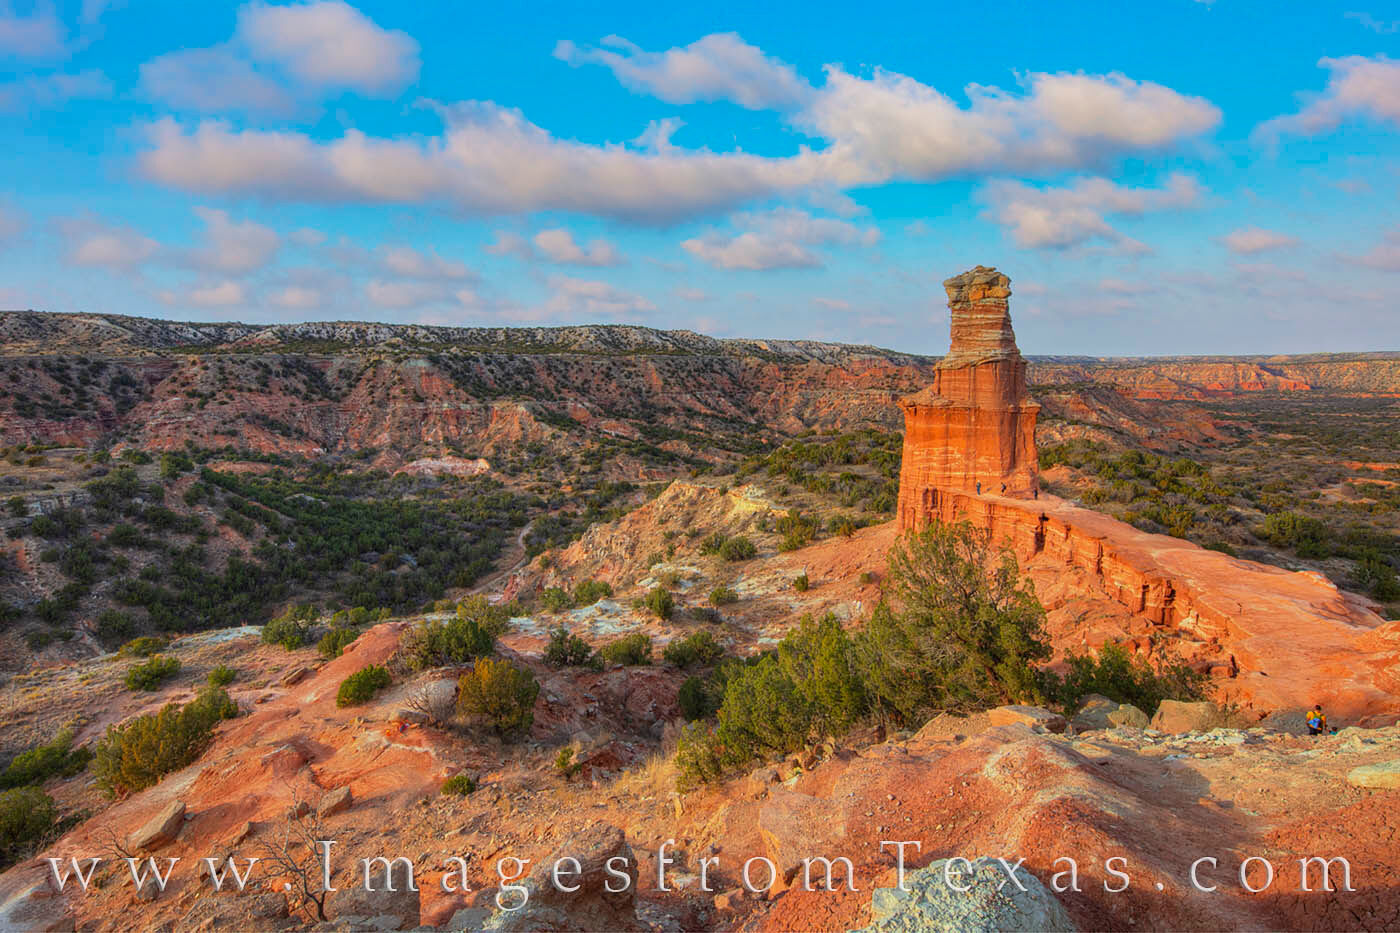 On a late afternoon in Palo Duro Canyon, the Lighthouse rises into the cool air. As one of the iconic hoodoos in the state park...